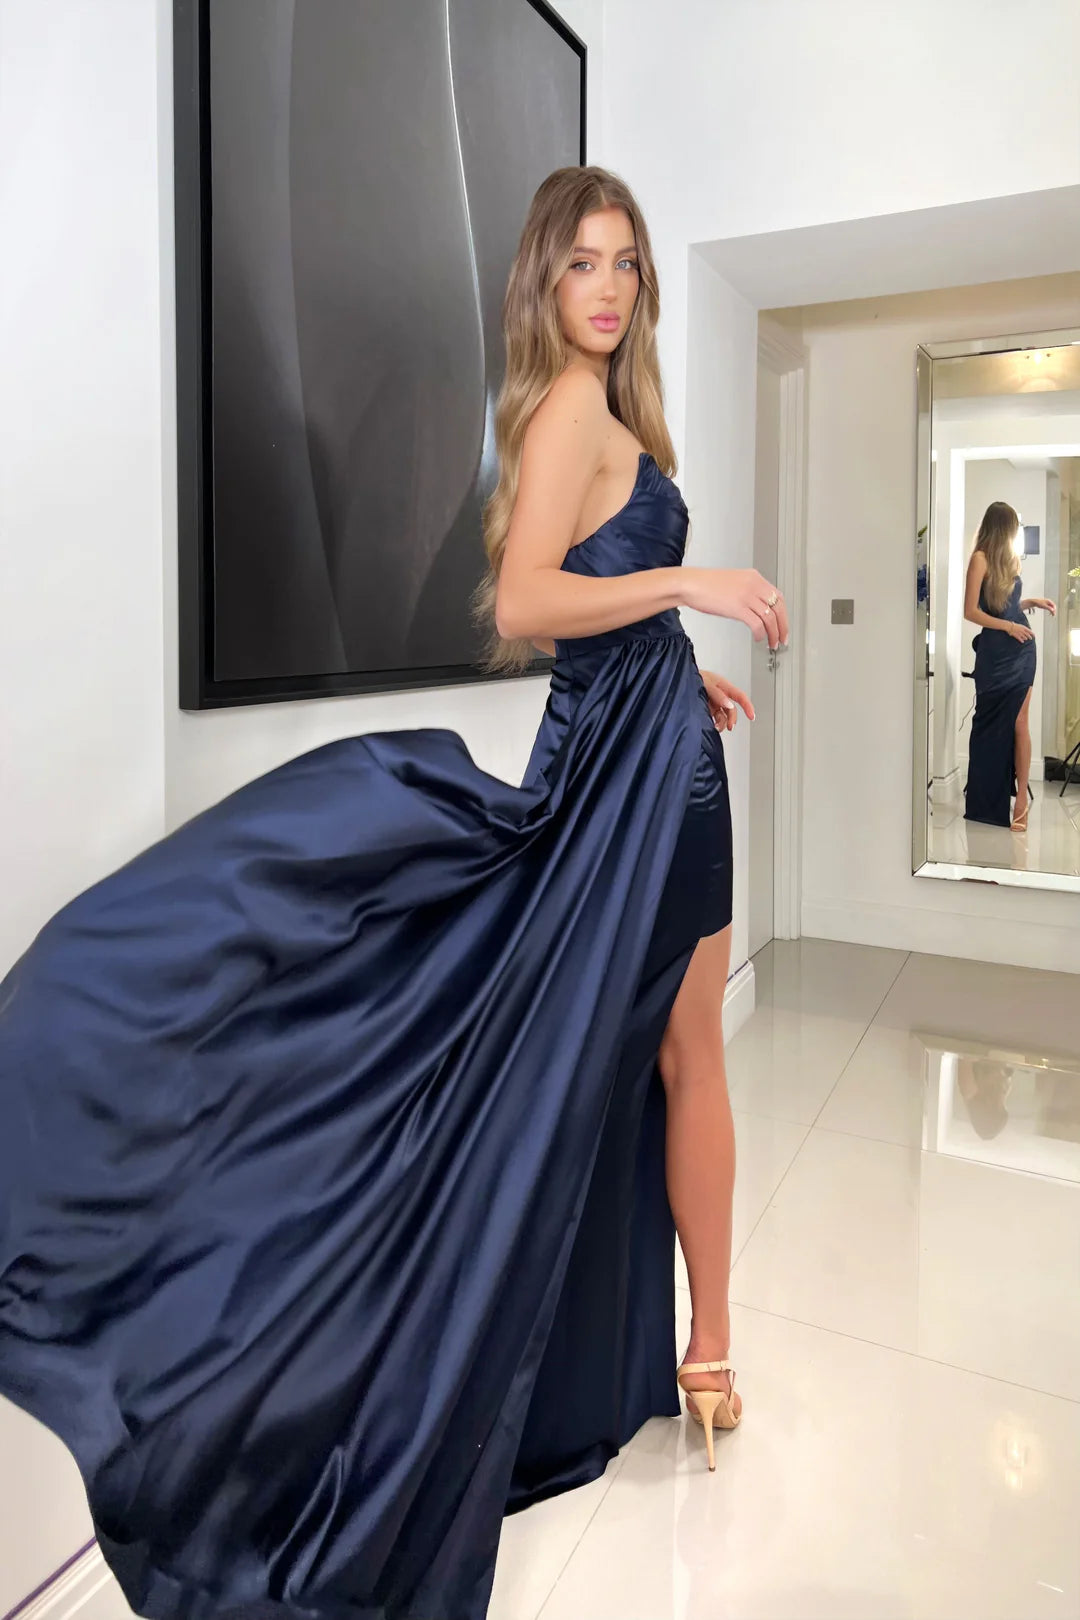 JX6020 Strapless Sweetheart Neck Satin Evening/Prom Dress - A stunning satin dress with a sweetheart neckline and high leg slit, perfect for evening occasions or prom.